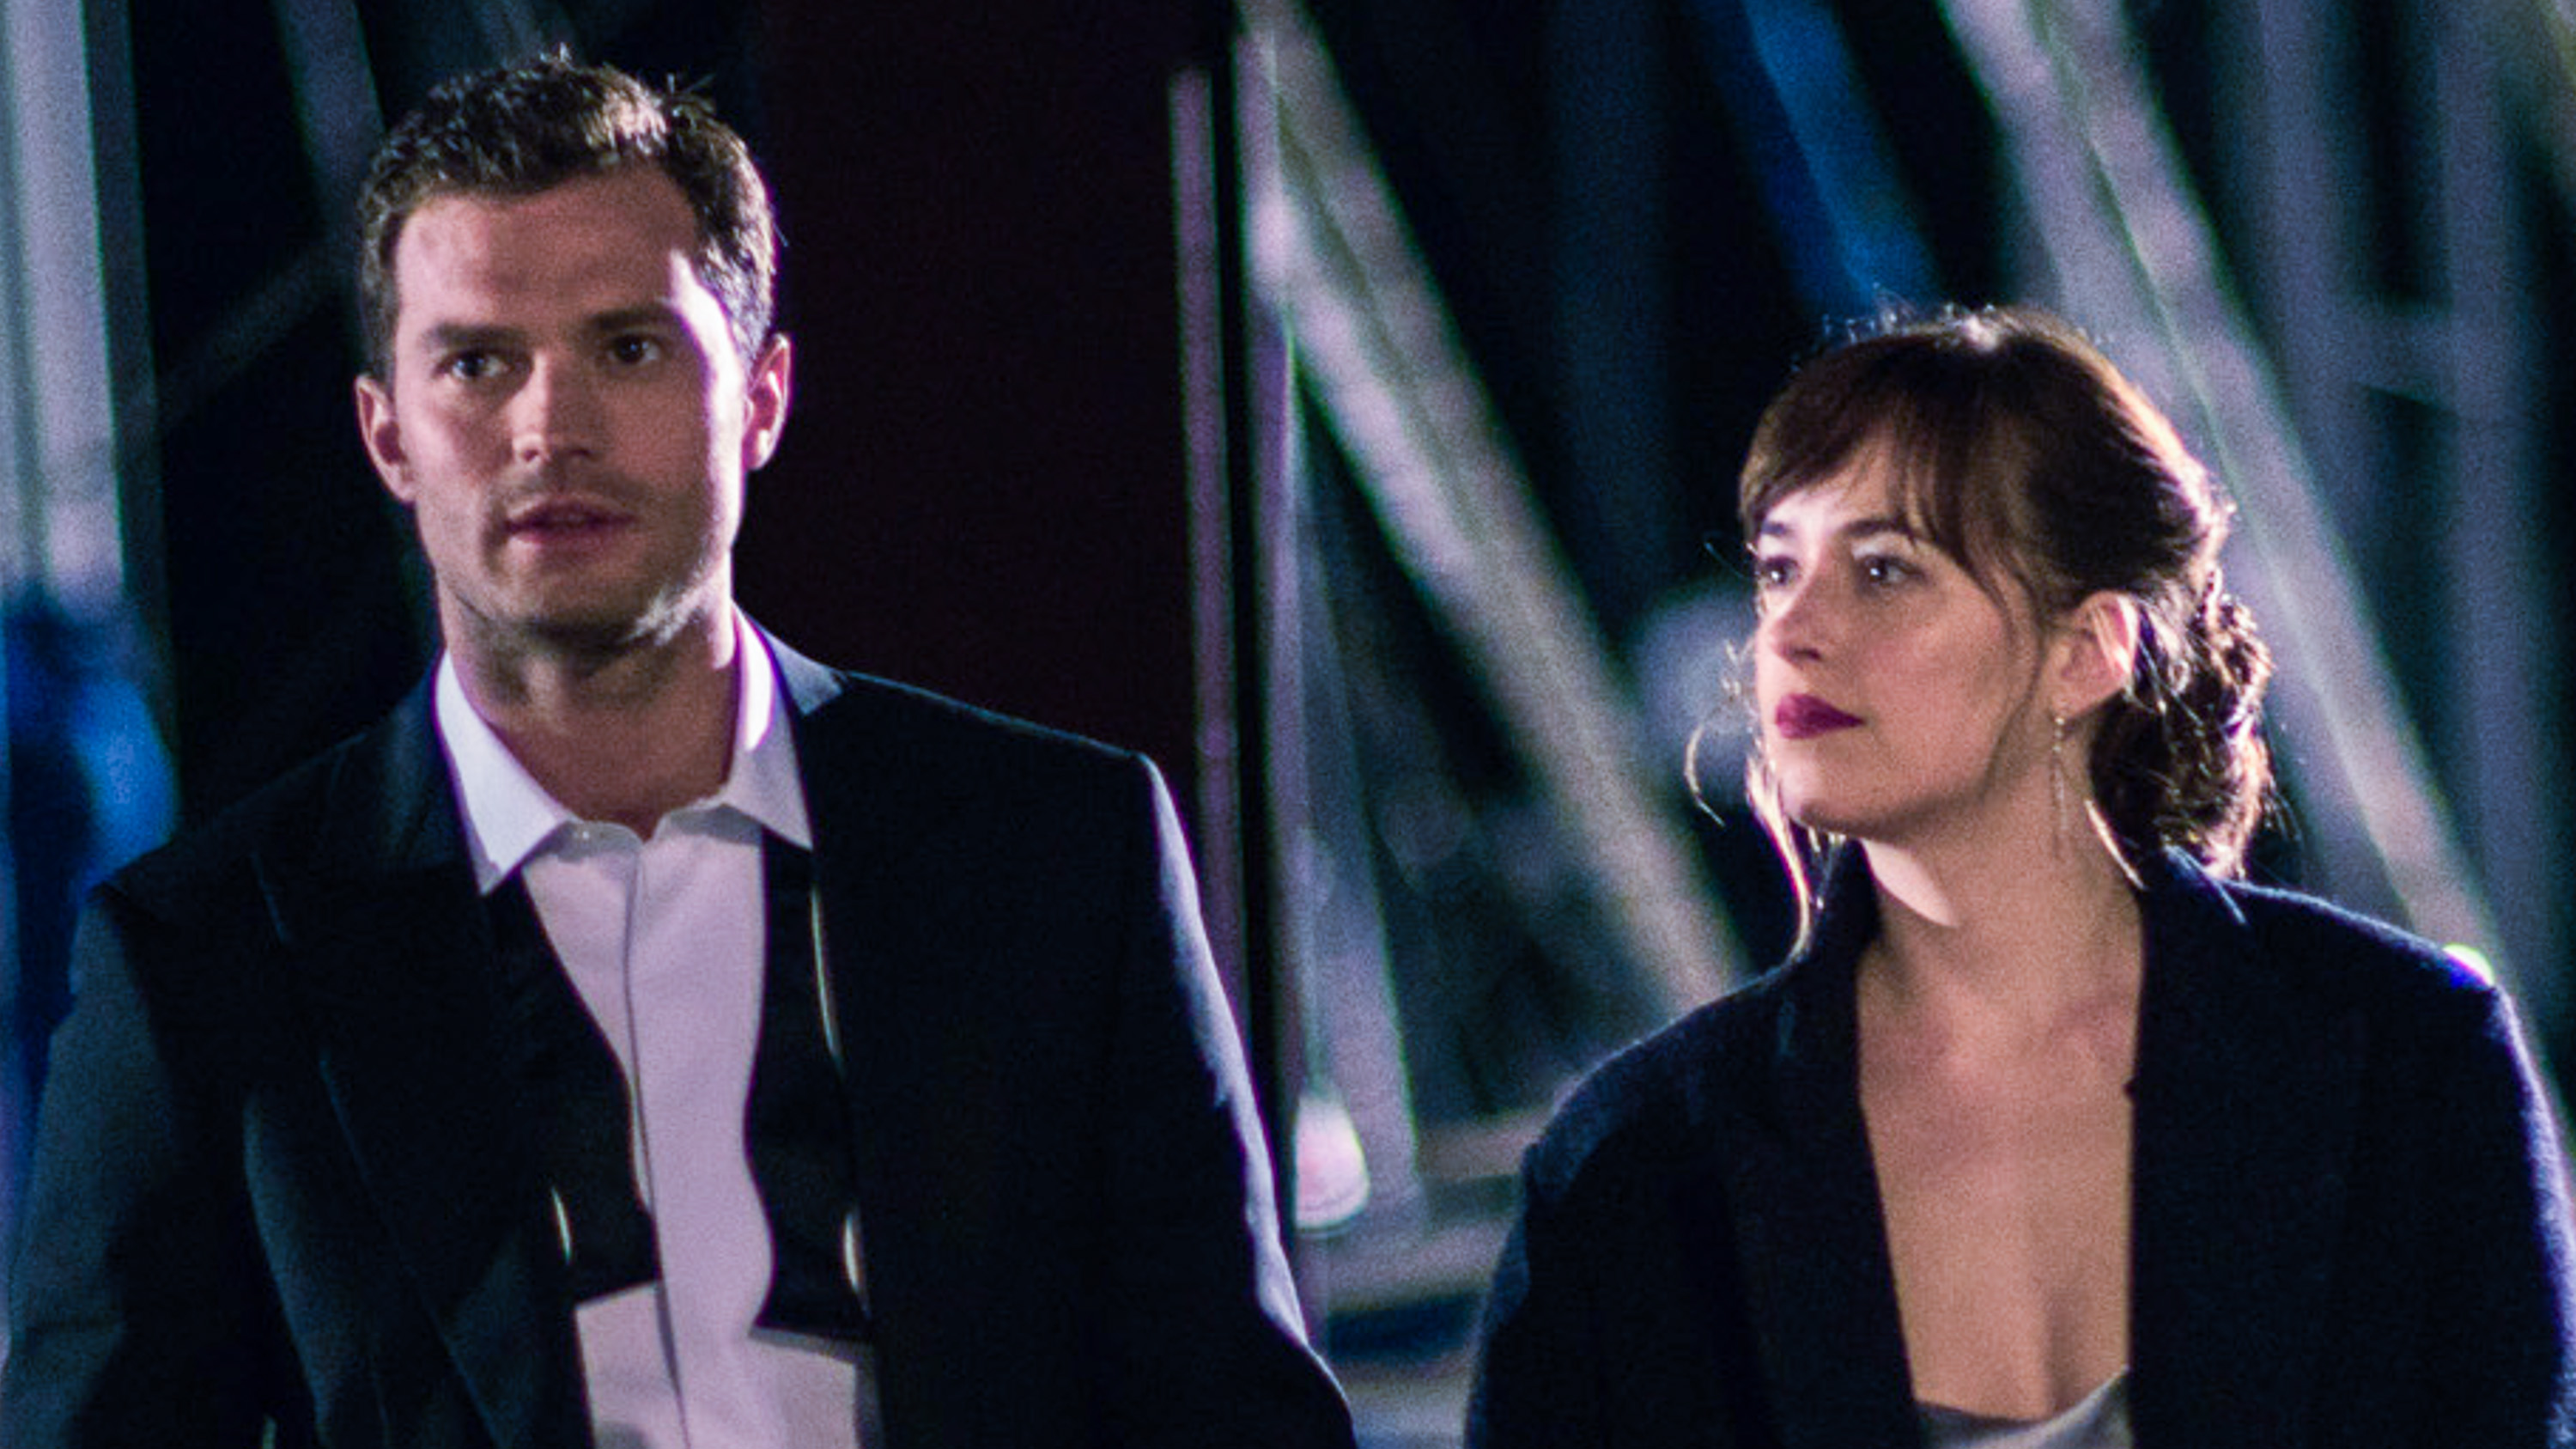 Movie Reviews What Critics Are Saying About Fifty Shades Darker 